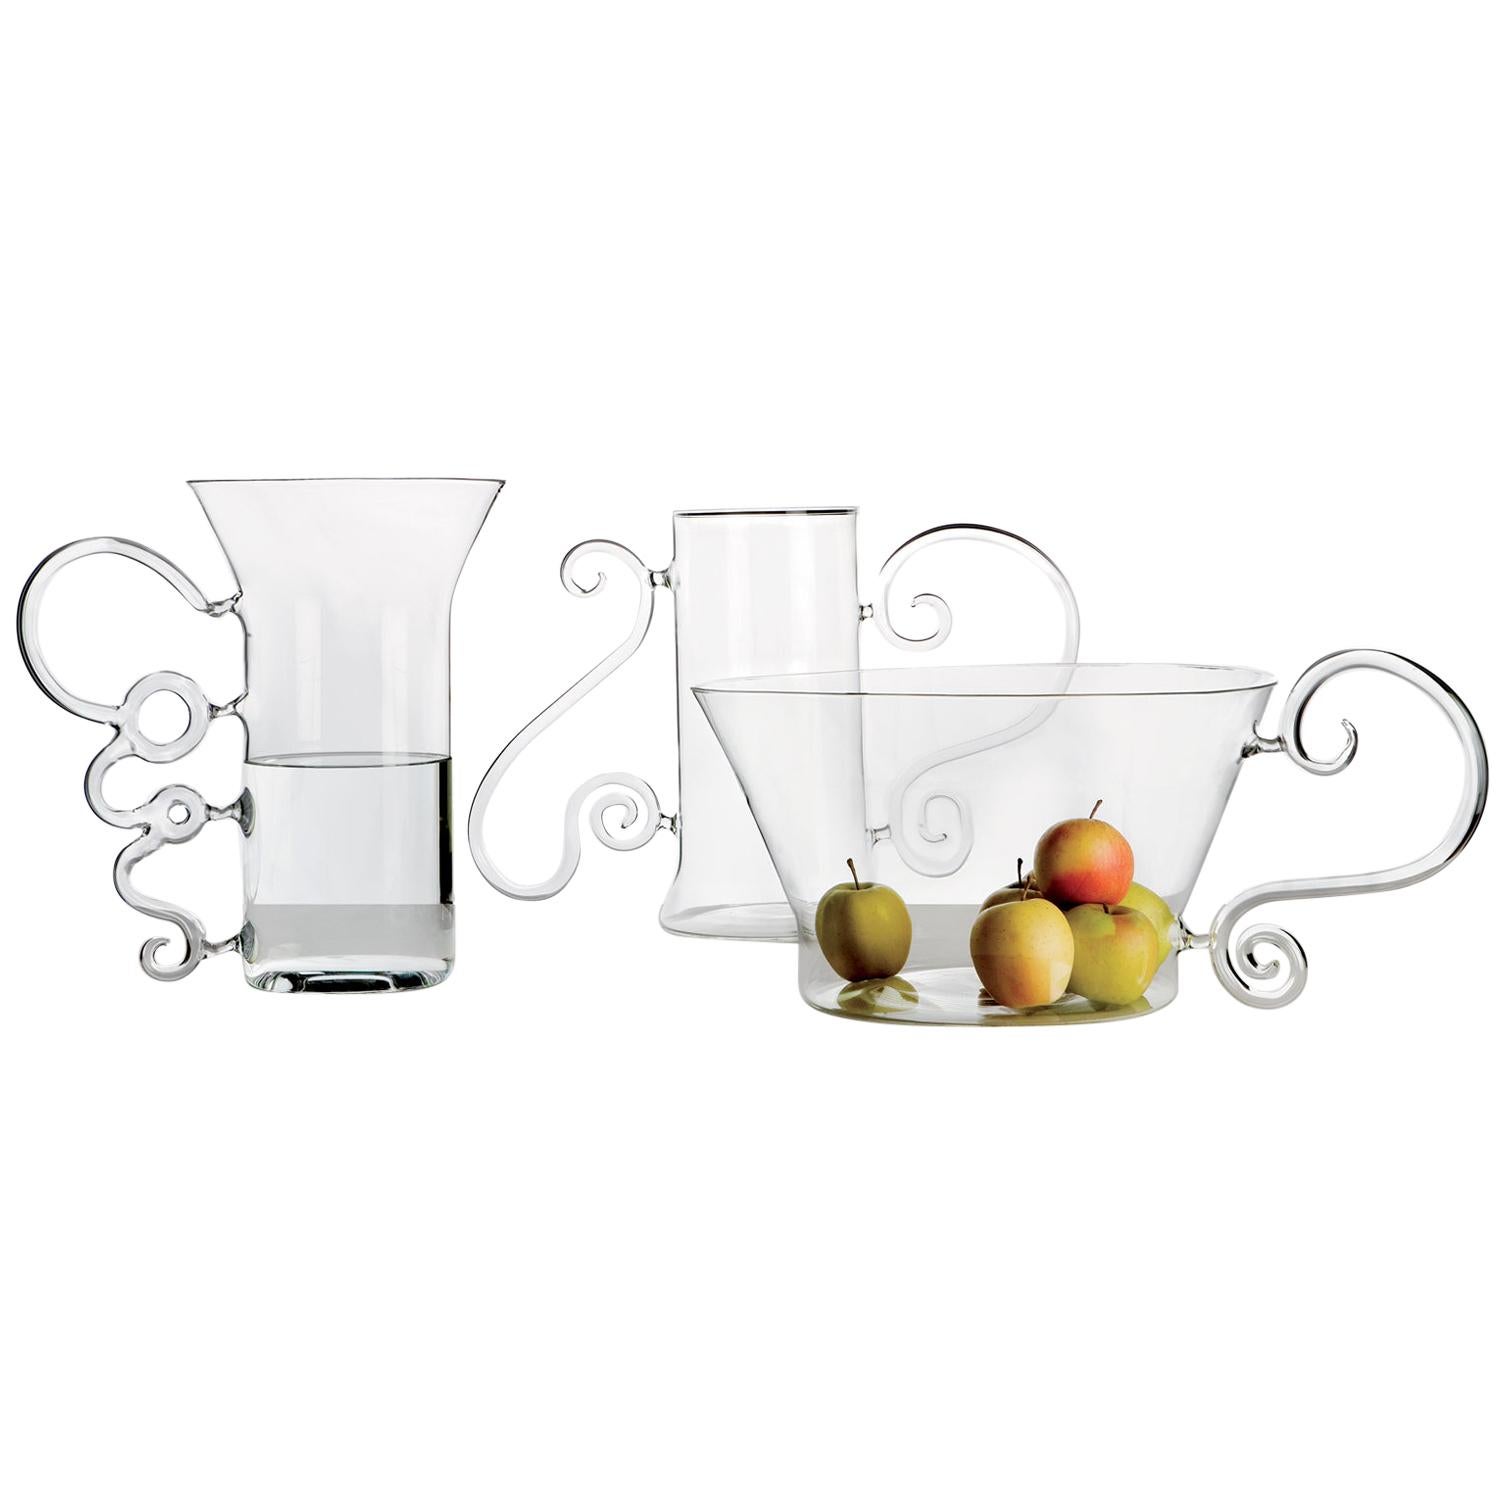 The Futiles collection has a Baroque taste with a frivolous essence. Dimensions are generous for all the pieces of the collection: a double handle vase, a giant water carafe and an impressive fruit pot, a normal carafe with a sumptuous handle. ?The